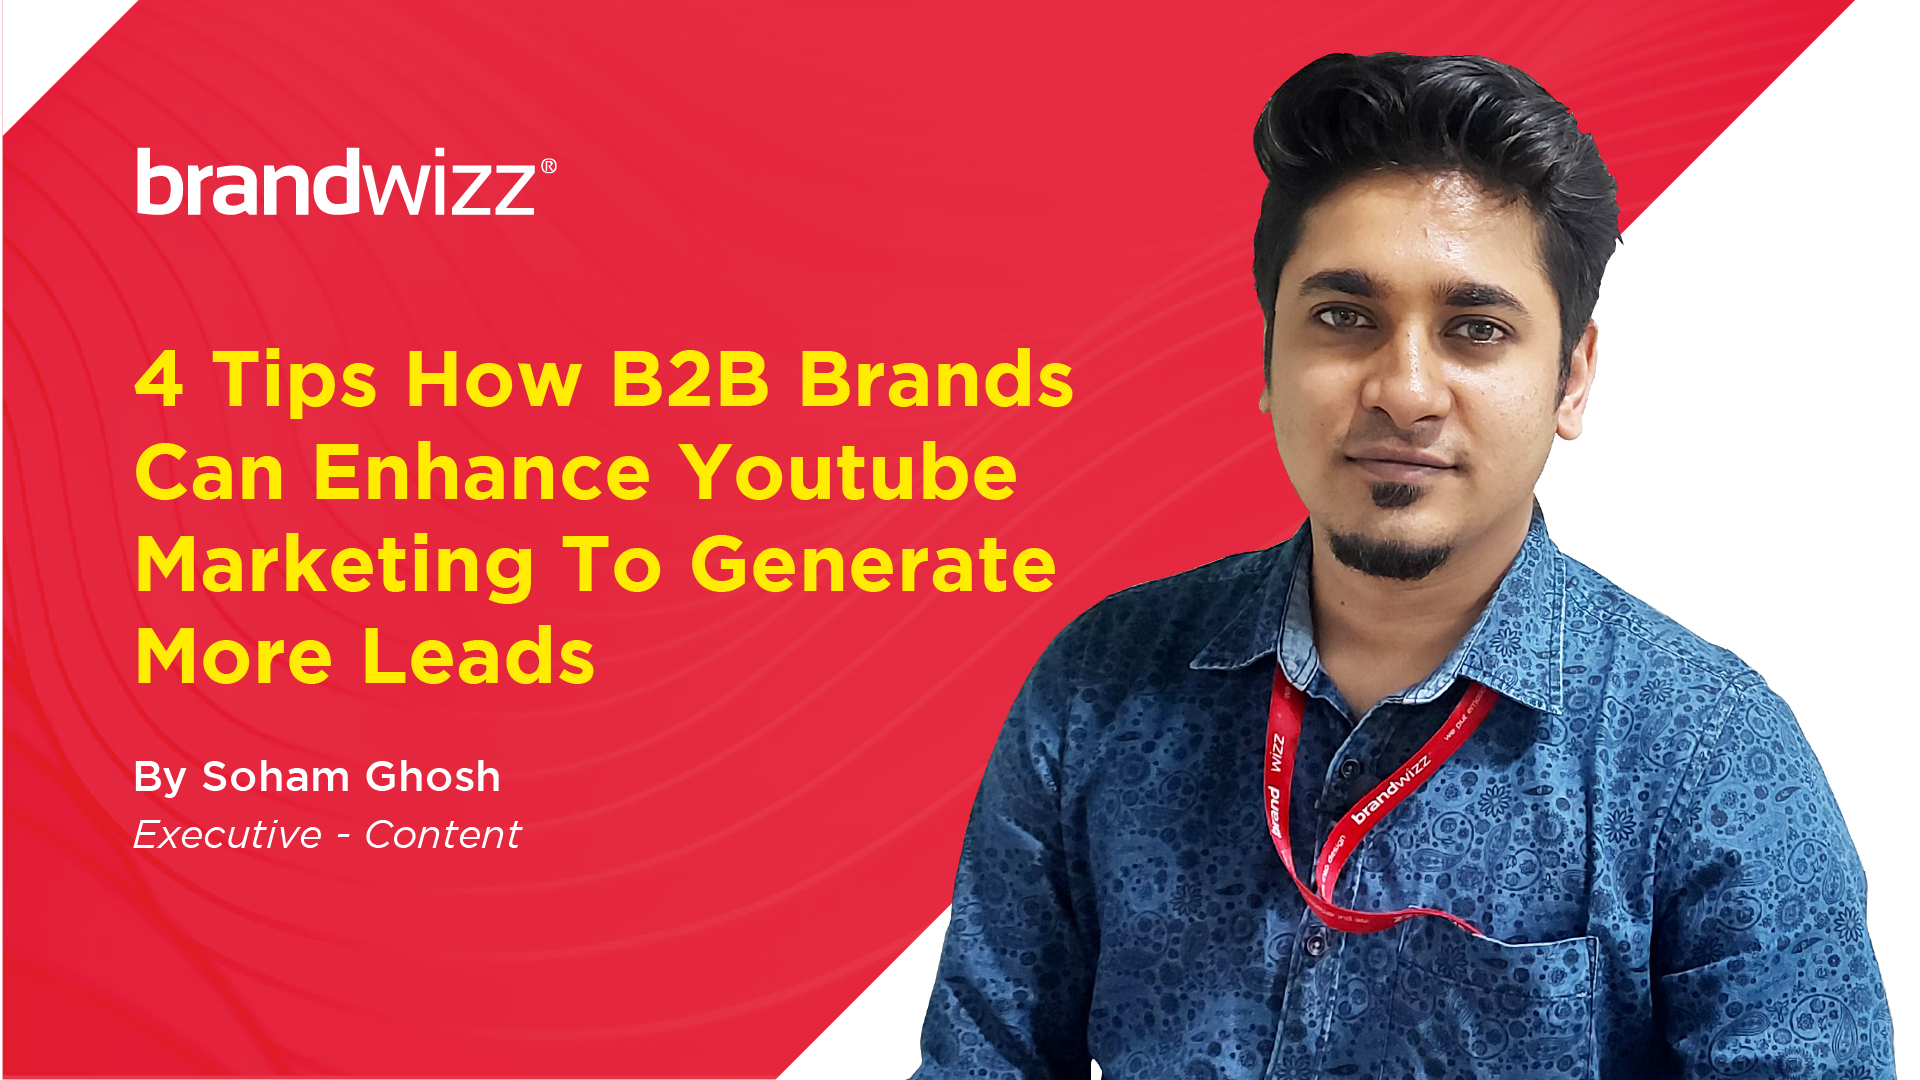 4 Tips How B2B Brands Can Enhance YouTube Marketing to Generate More Leads